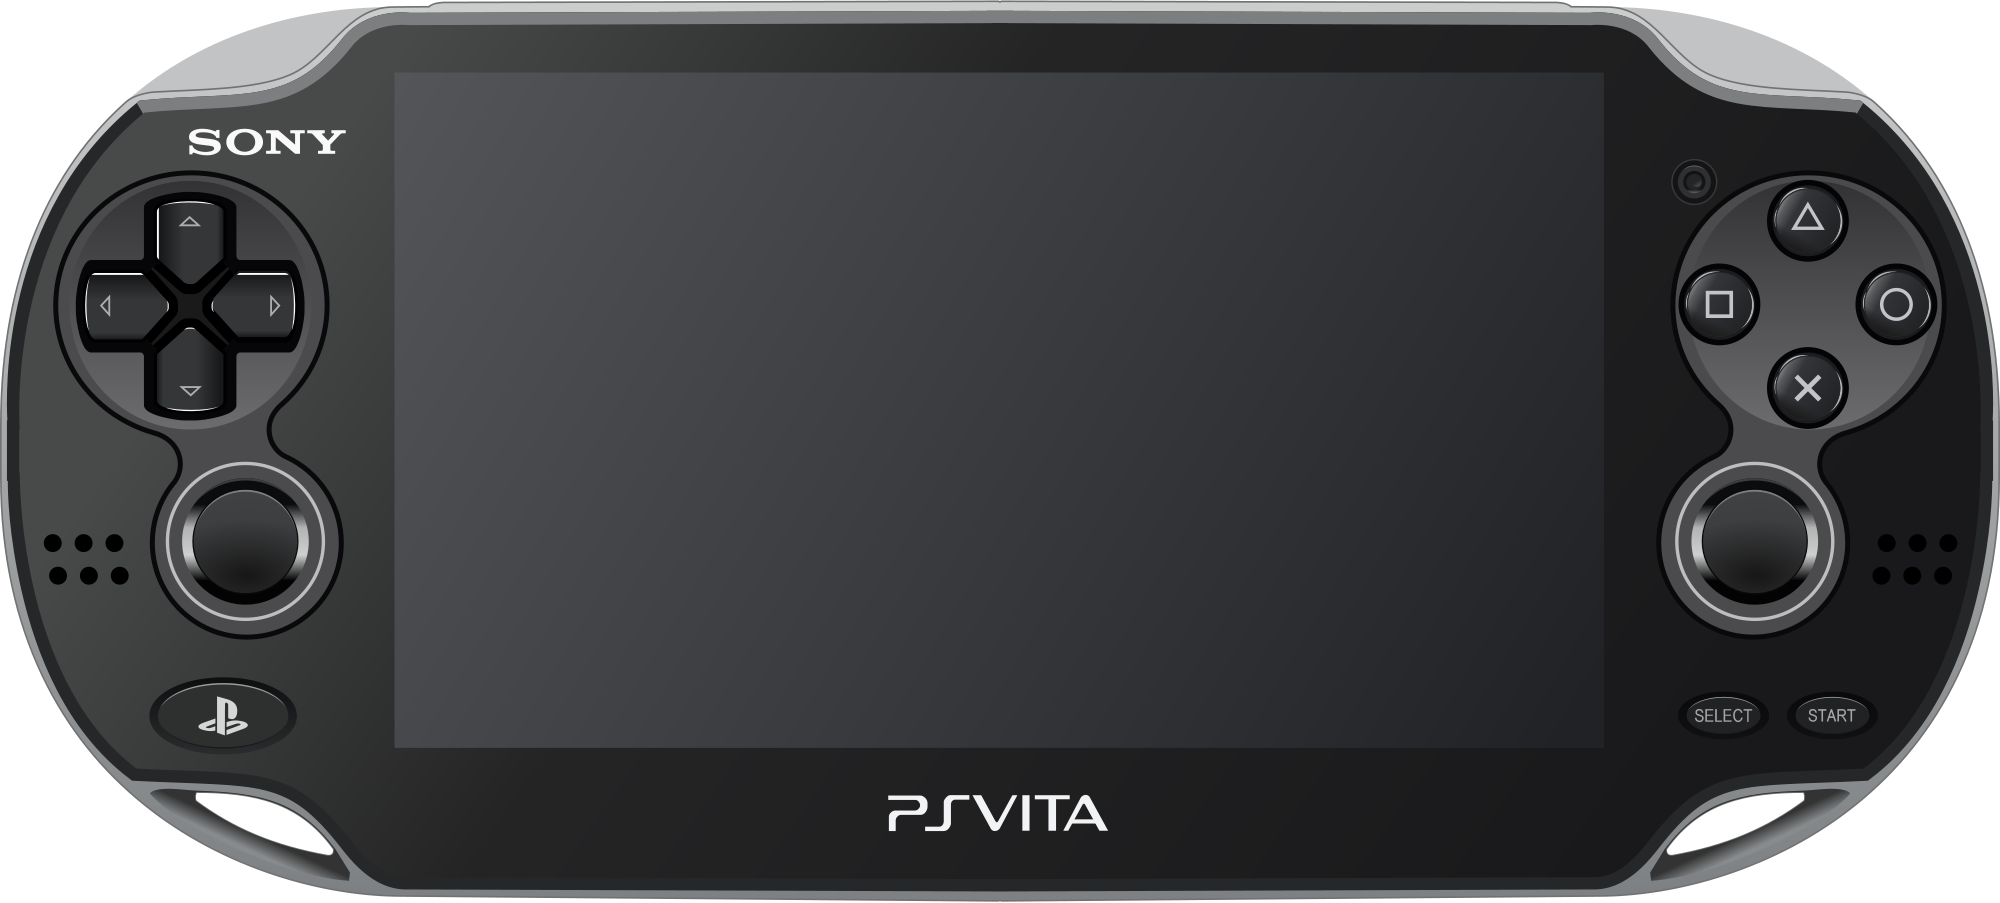 The Sony PlayStation Vita handheld videogame console and controller